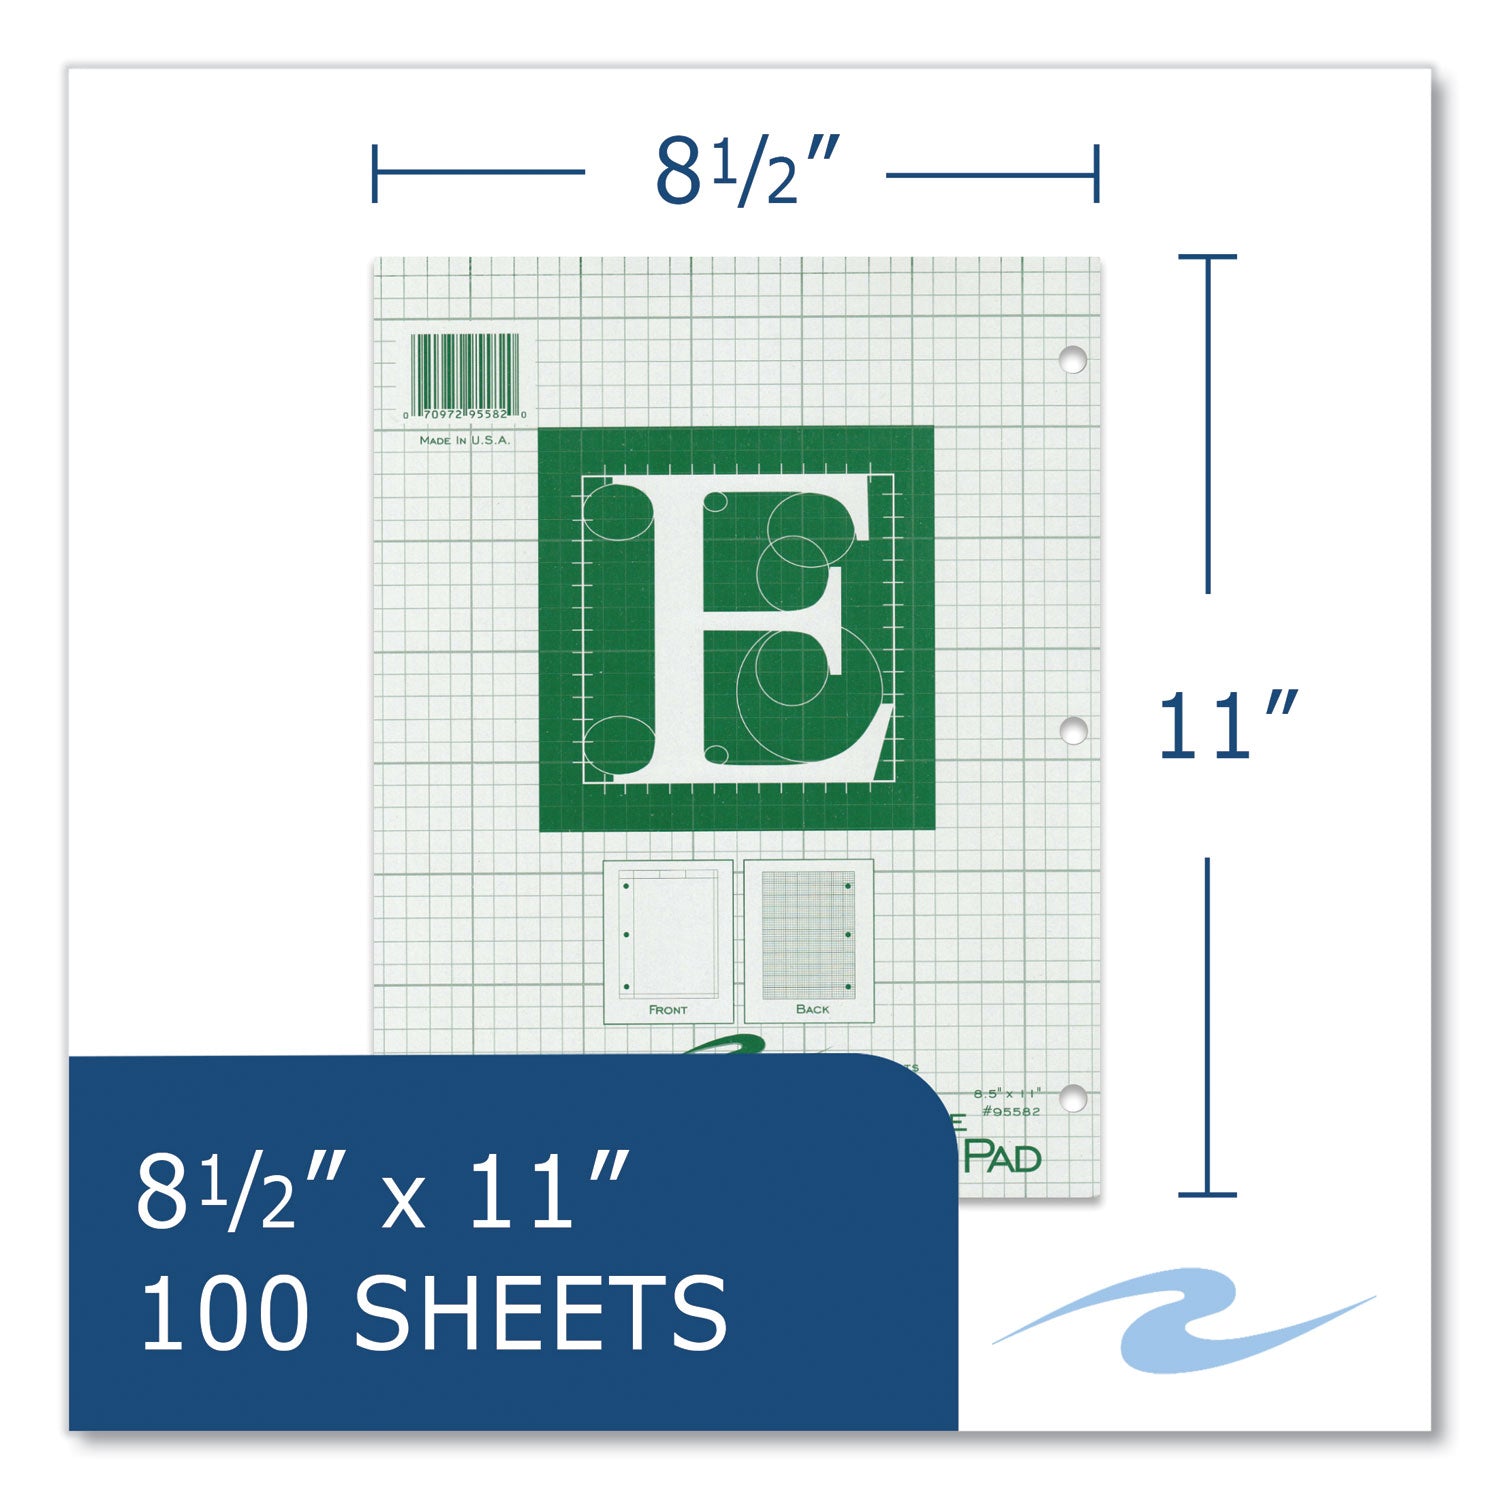 engineer-pad-125-margin-quad-rule-5-sq-in-1-sq-in-100-lt-green-85x11-sheets-pad-24-ct-ships-in-4-6-business-days_roa95582cs - 4